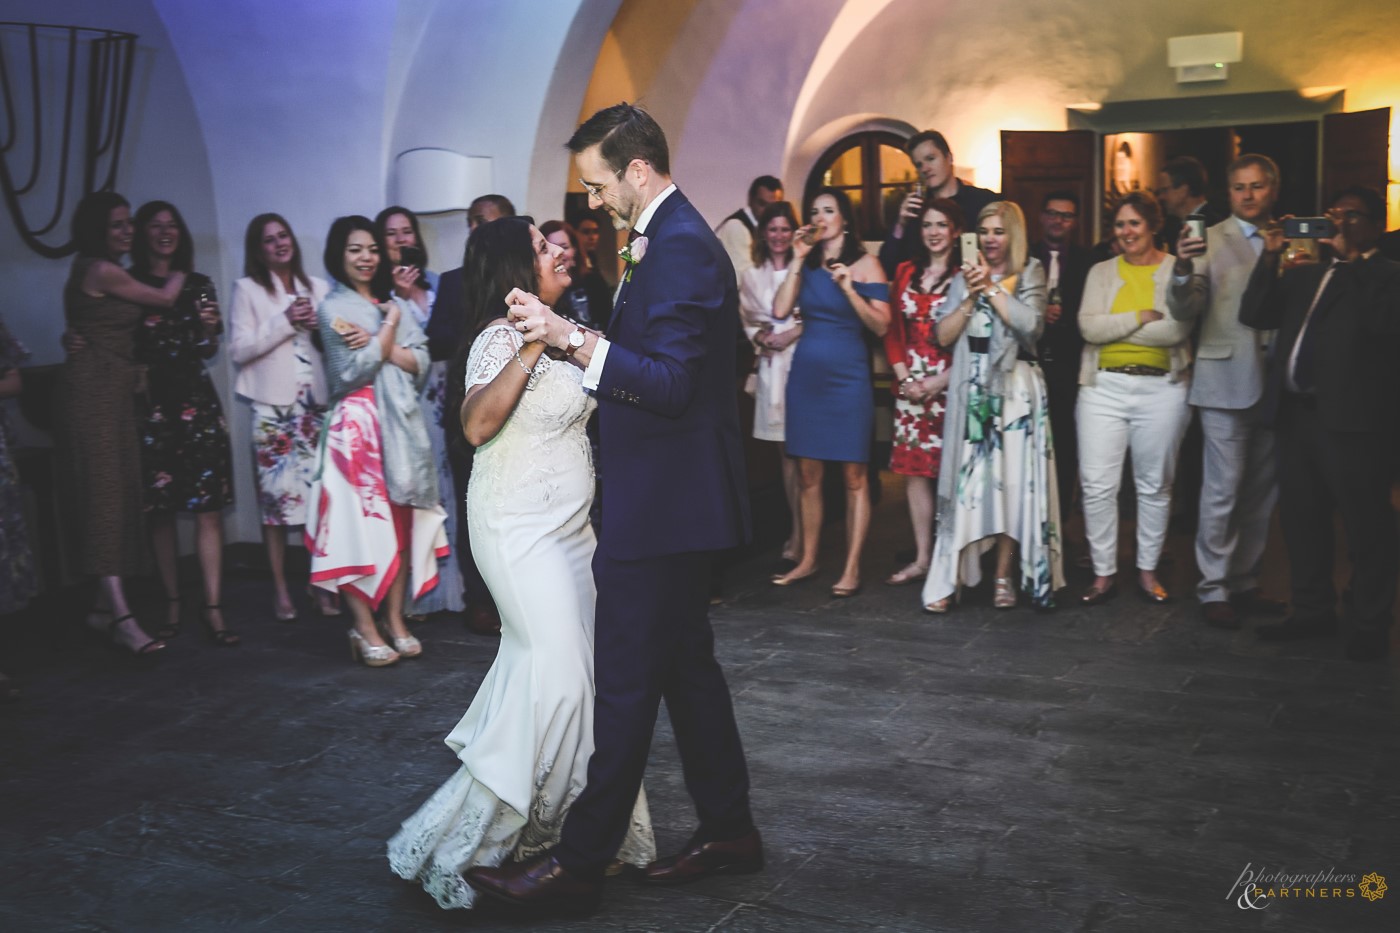 The first dance!